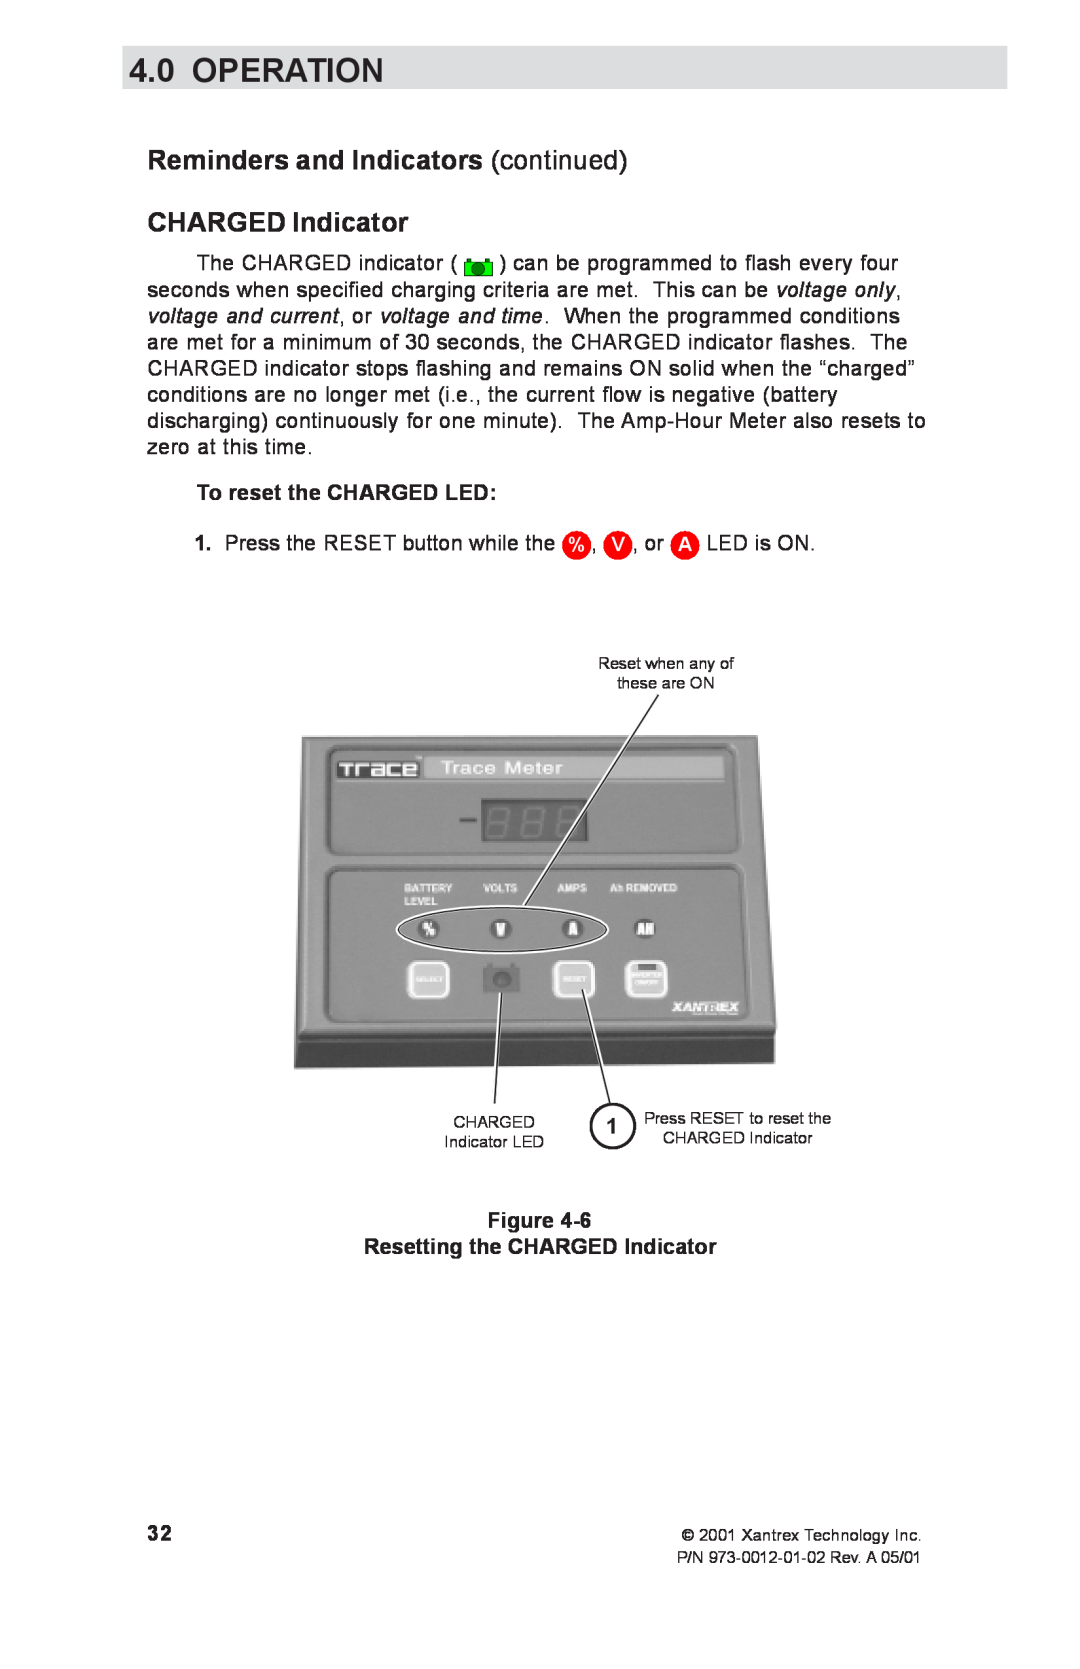 Xantrex Technology TM500A manual Reminders and Indicators continued CHARGED Indicator, To reset the CHARGED LED, Operation 